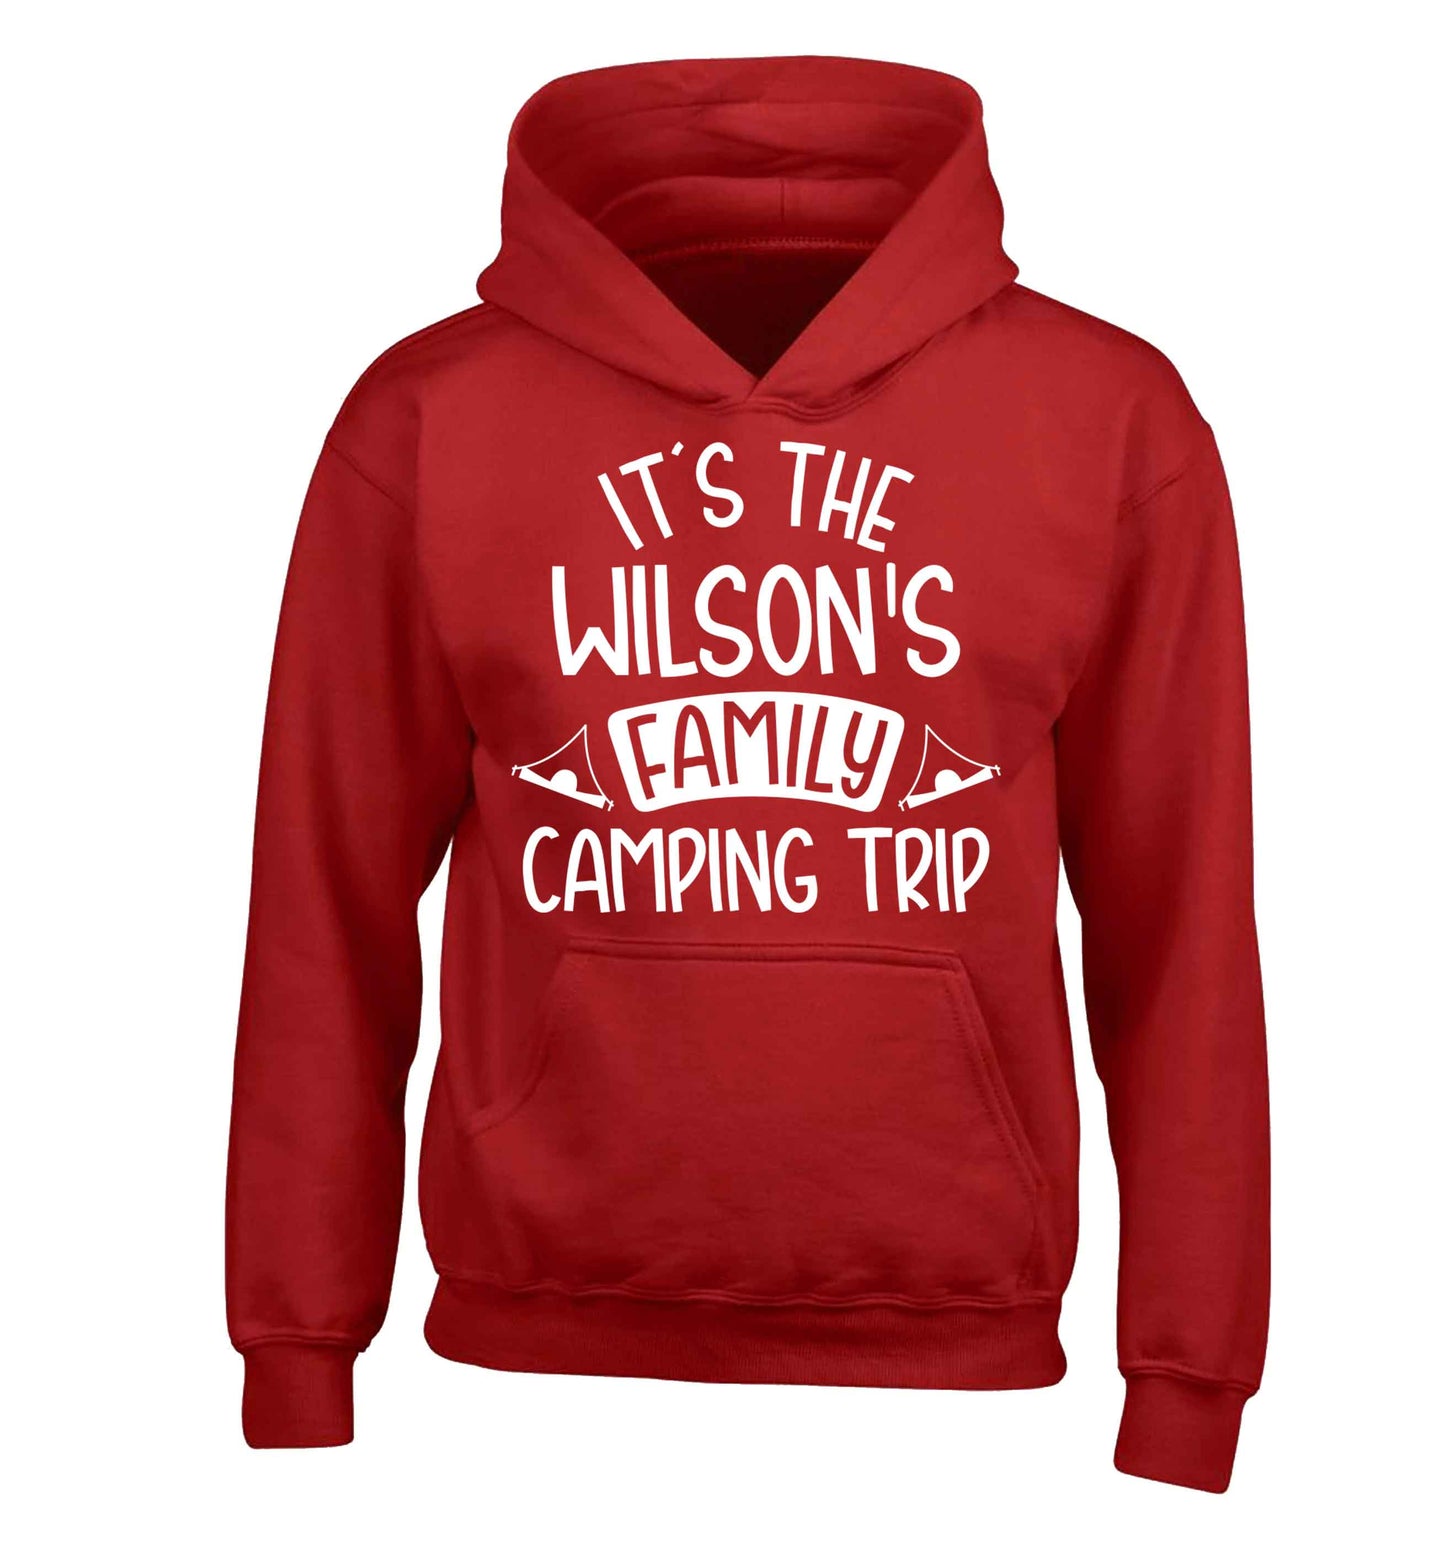 It's the Wilson's family camping trip personalised children's red hoodie 12-13 Years